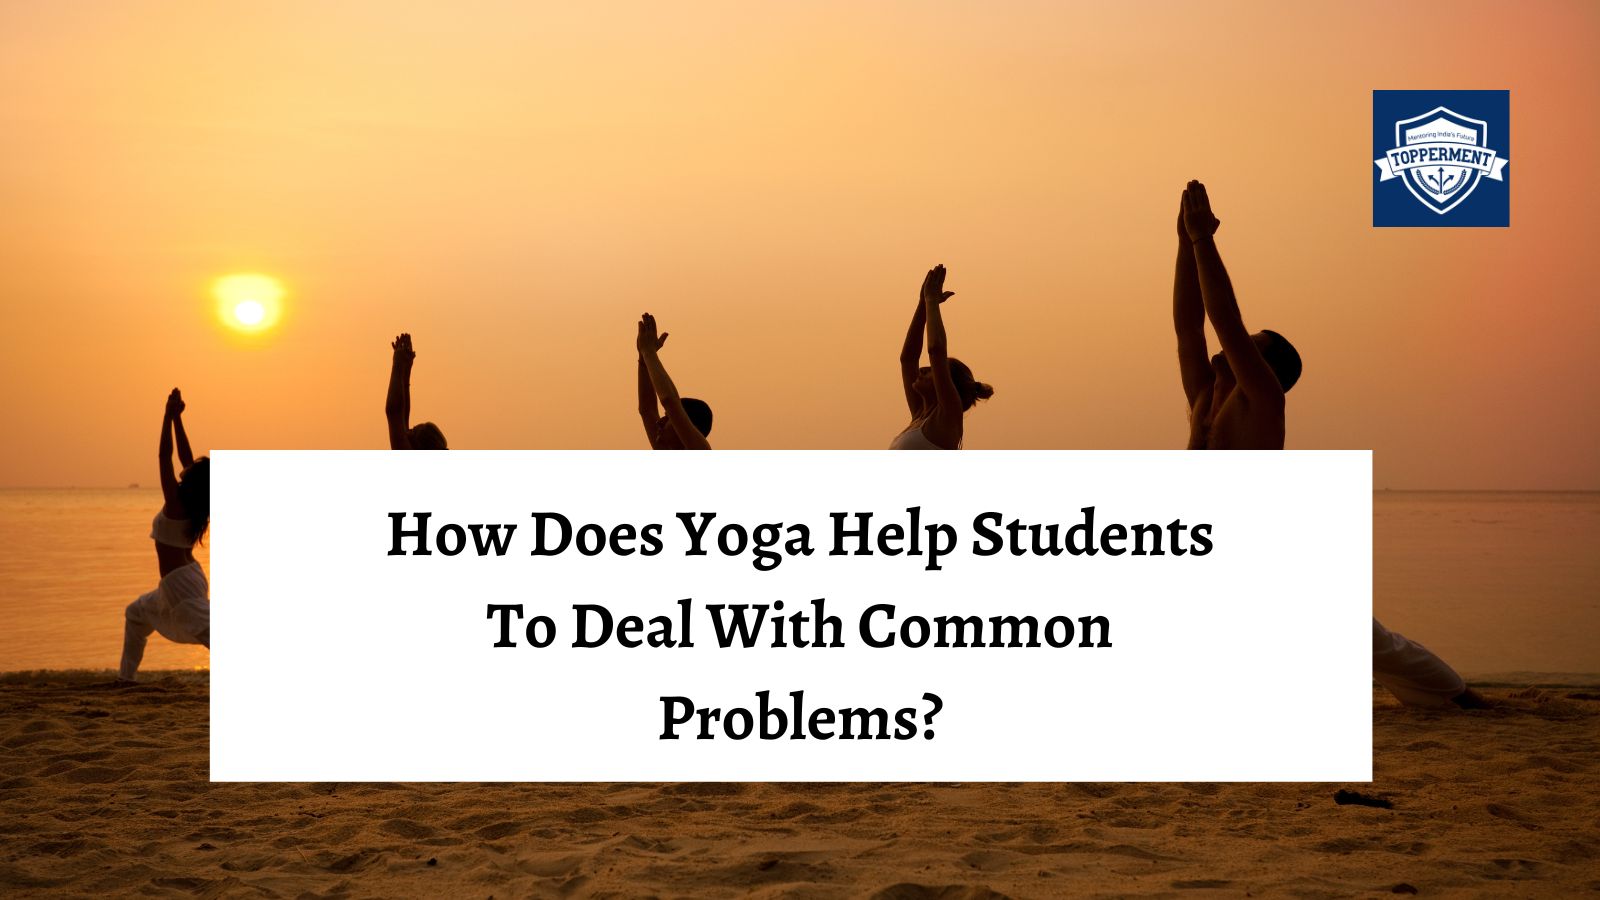 How does Yoga help students to deal with common problems? | Best UPSC IAS Coaching For Mentorship And Guidance